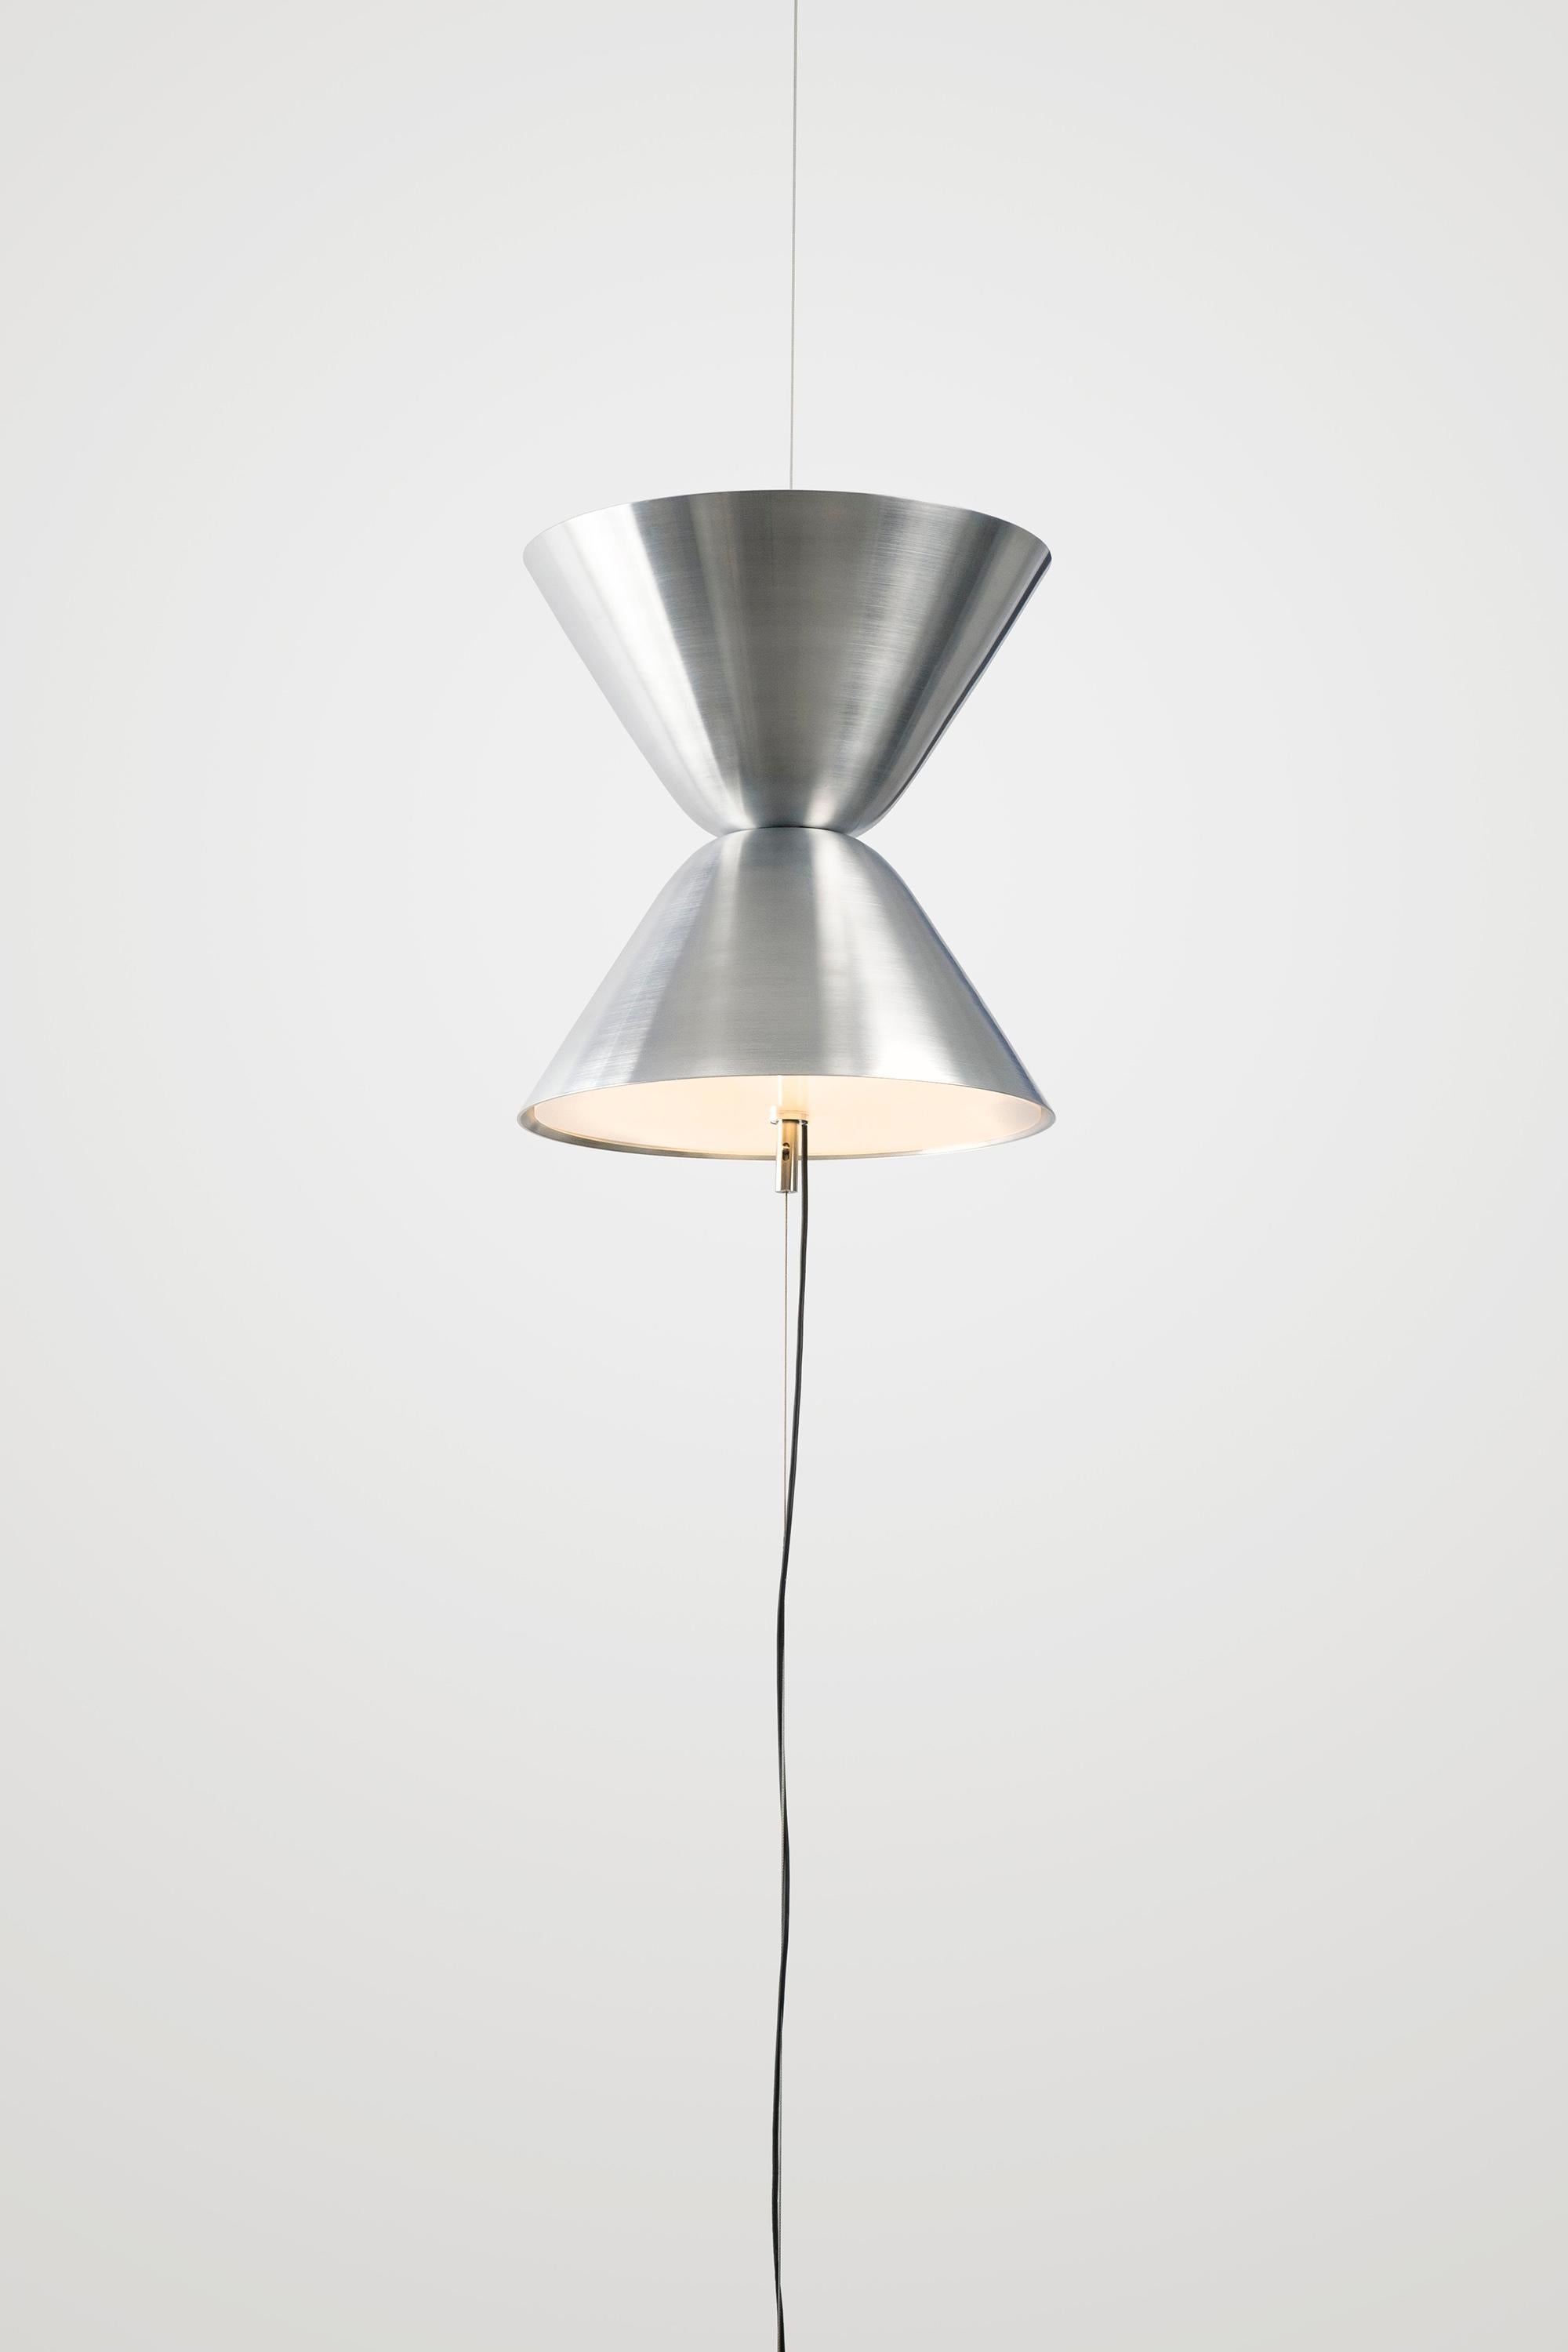 Daniel Becker 'Aureole' Suspended Floor Lamp for Moss Objects. Designed by Berlin luminary Daniel Becker and handmade to order, 'Aureole' is a highly flexible lamp that can be used as a ceiling lamp, reading lamp or floodlight. The shape of the